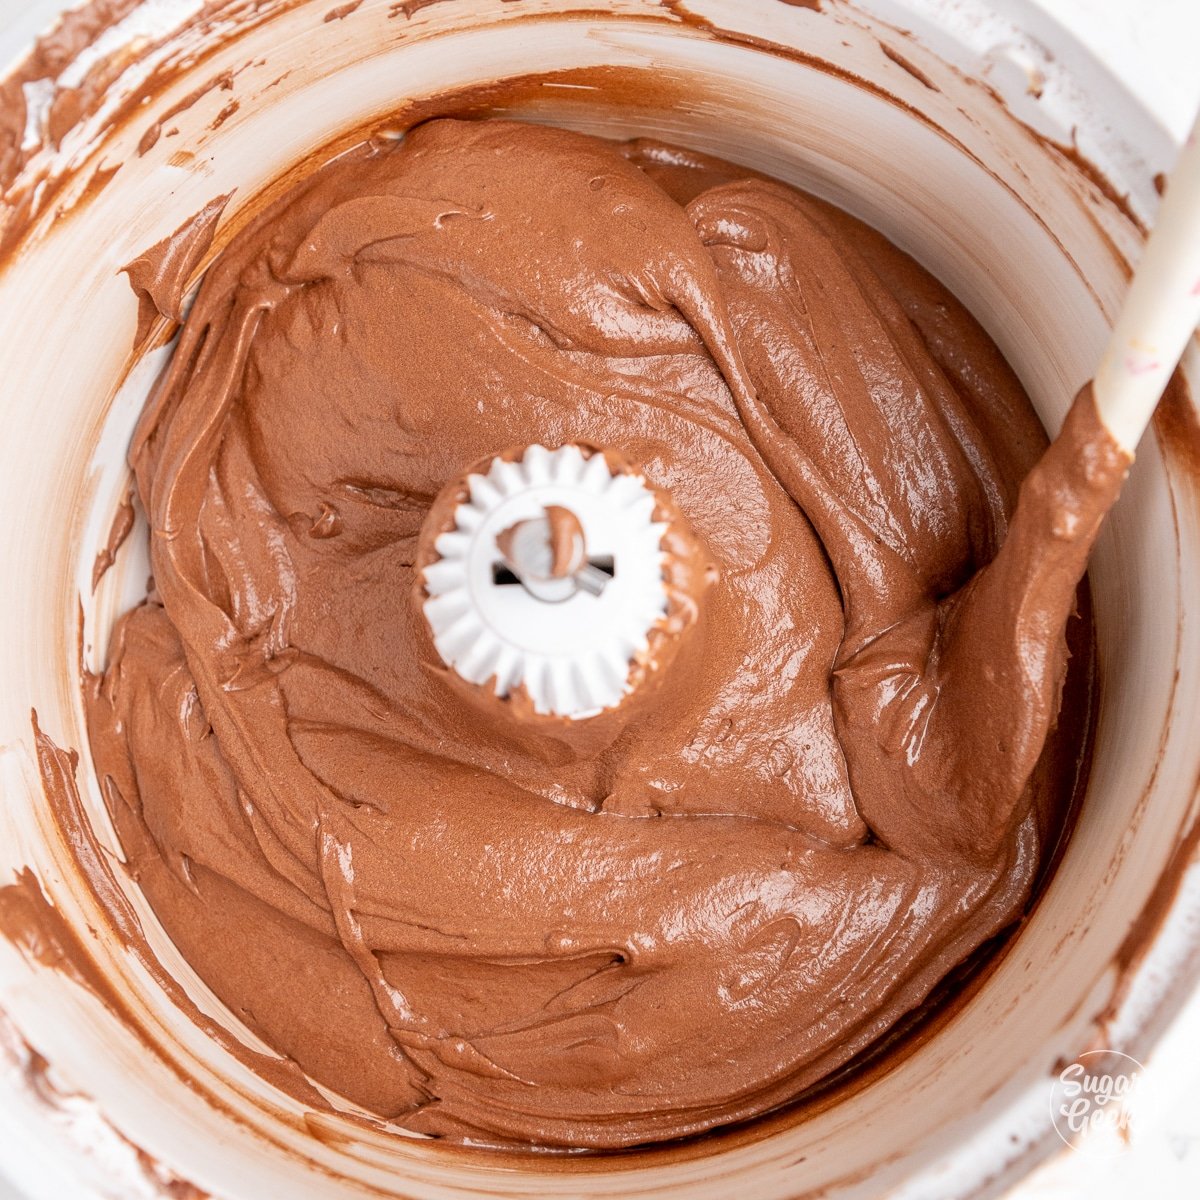 stand mixer bowl filled with creamy chocolate cake batter